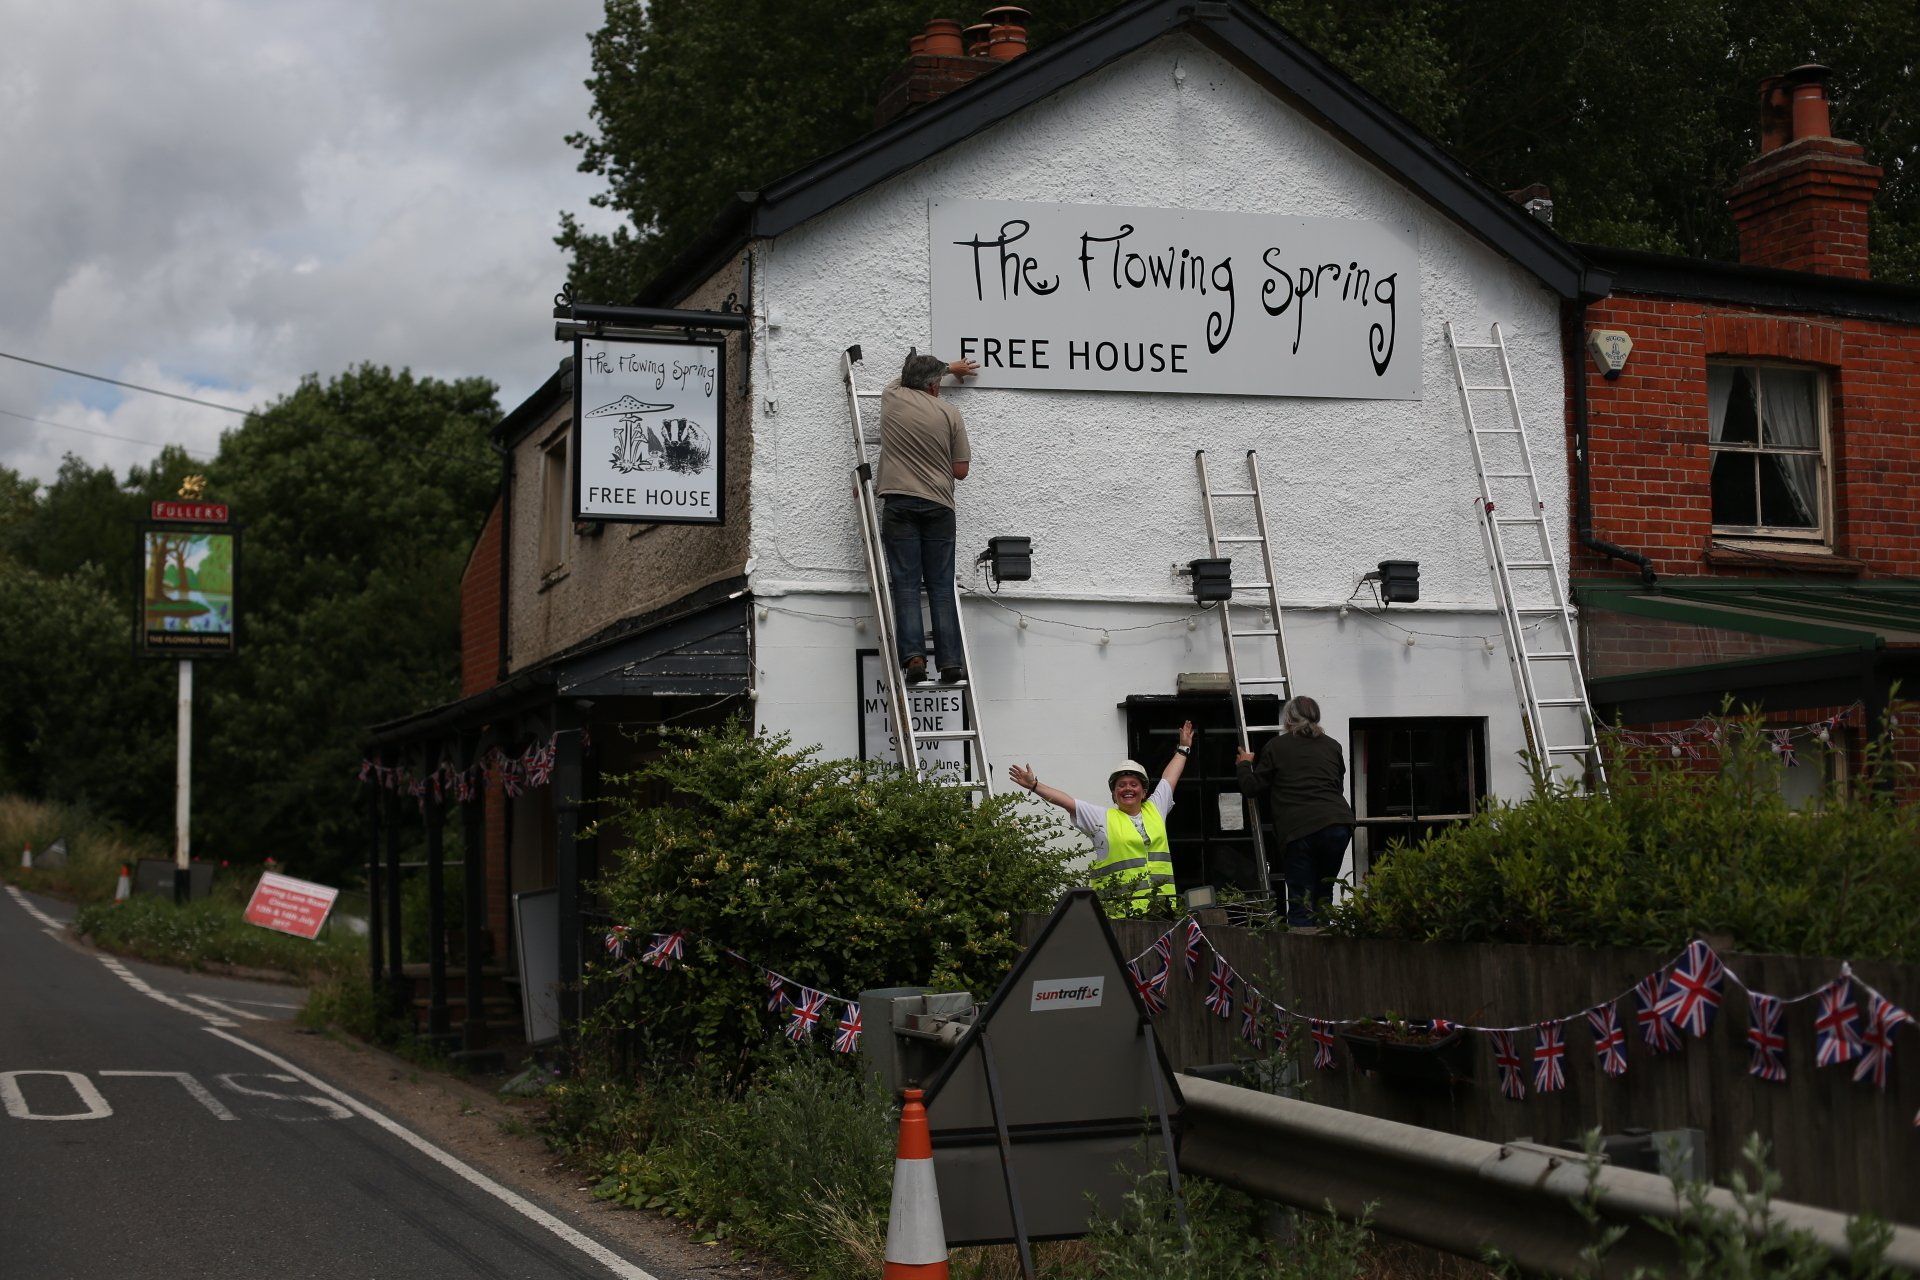 Rebranding The Flowing Spring when the freehold was purchased by Nick and Hazel in 2017